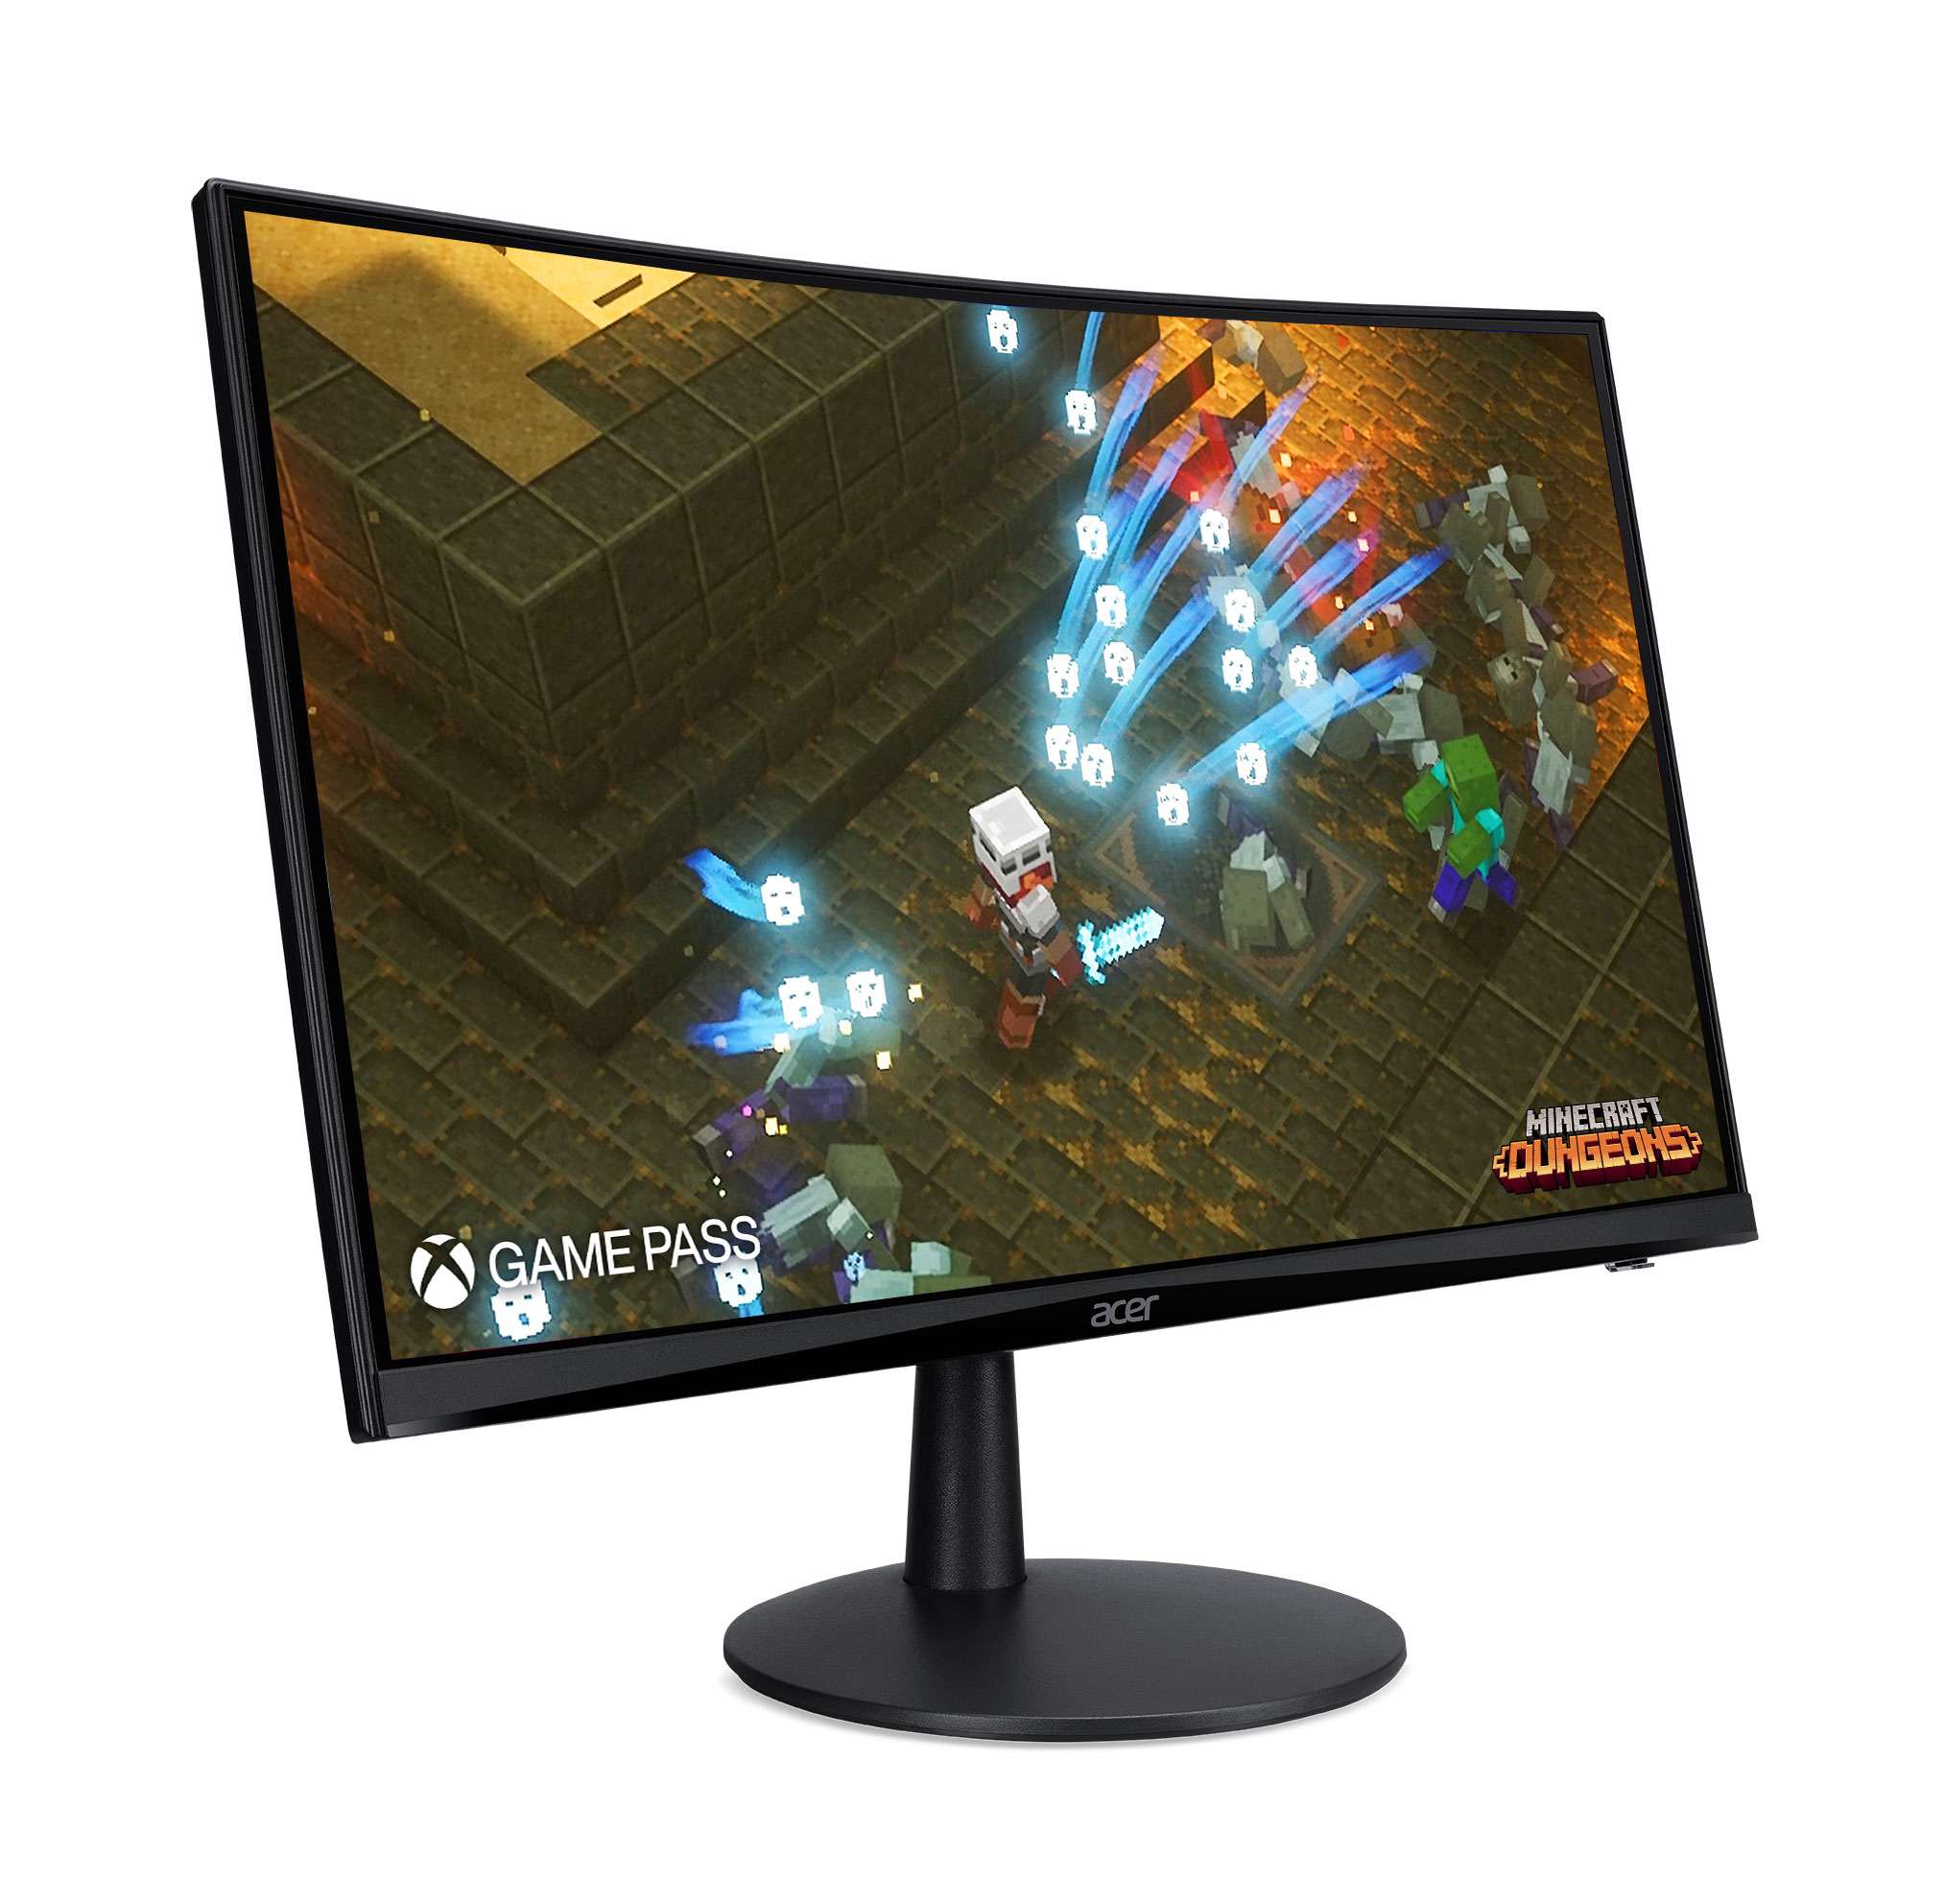 Acer Nitro 23.6" inch Curved Full HD Gaming Monitor (New) - Black (ED240Q Sbiip) - image 2 of 8